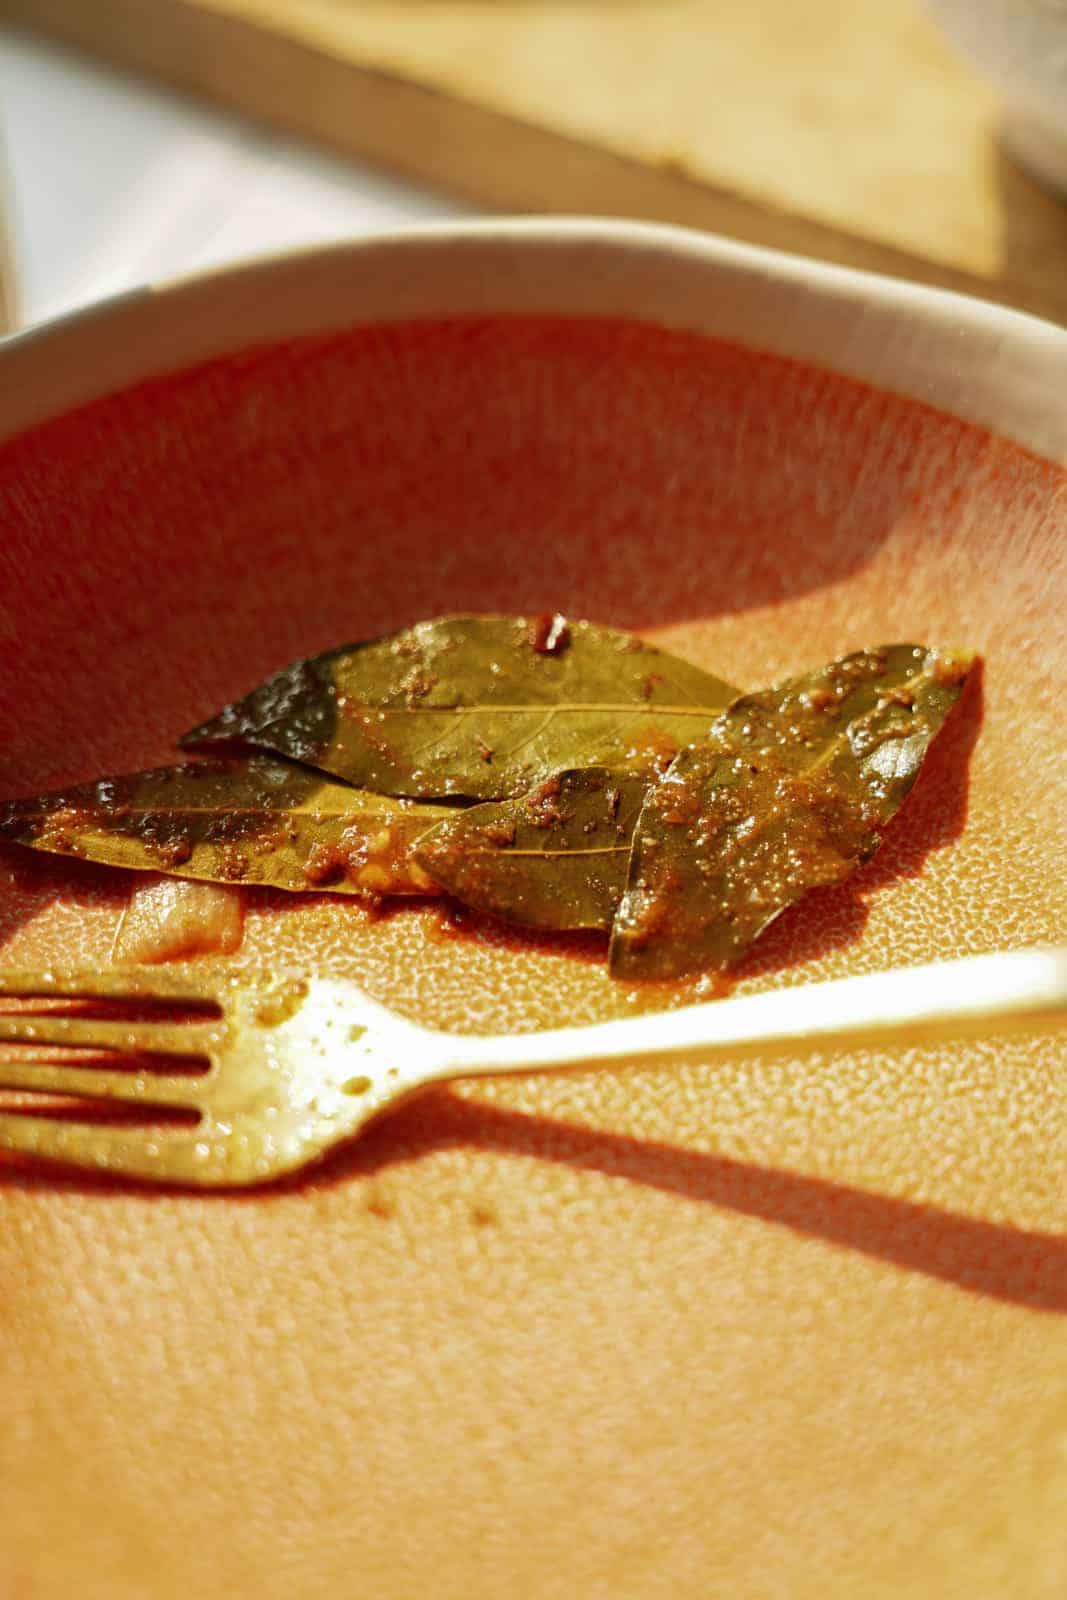 Bay leaves on a plate